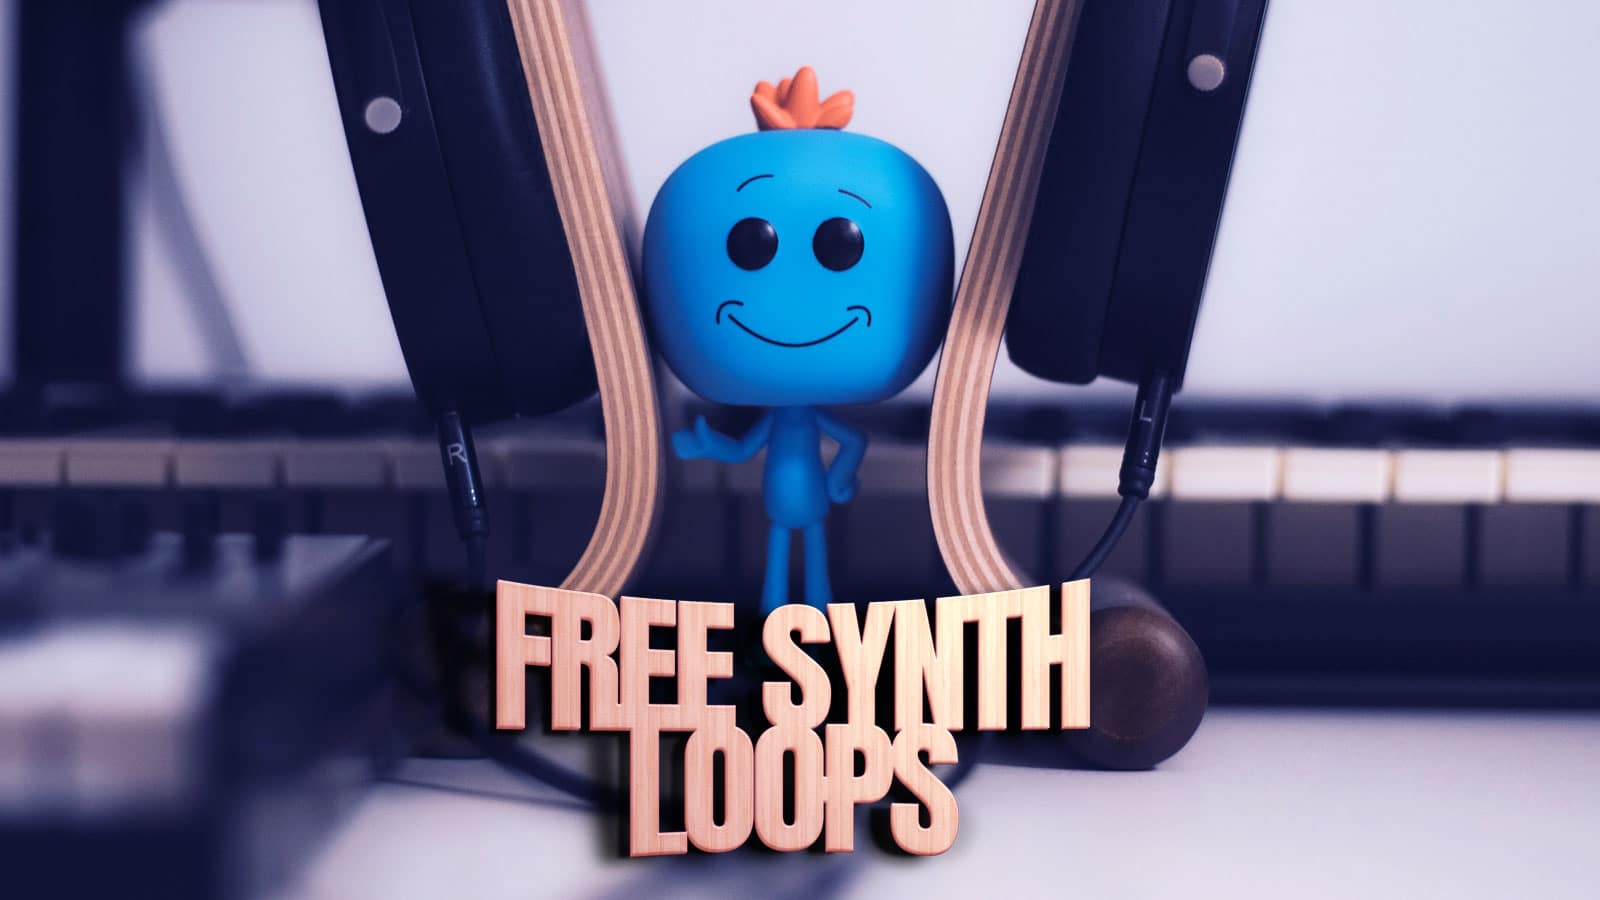 100 FREE Synth Loops for Electronica, Minimal, Deep Tech, Techno, Future Pop and Cinematic